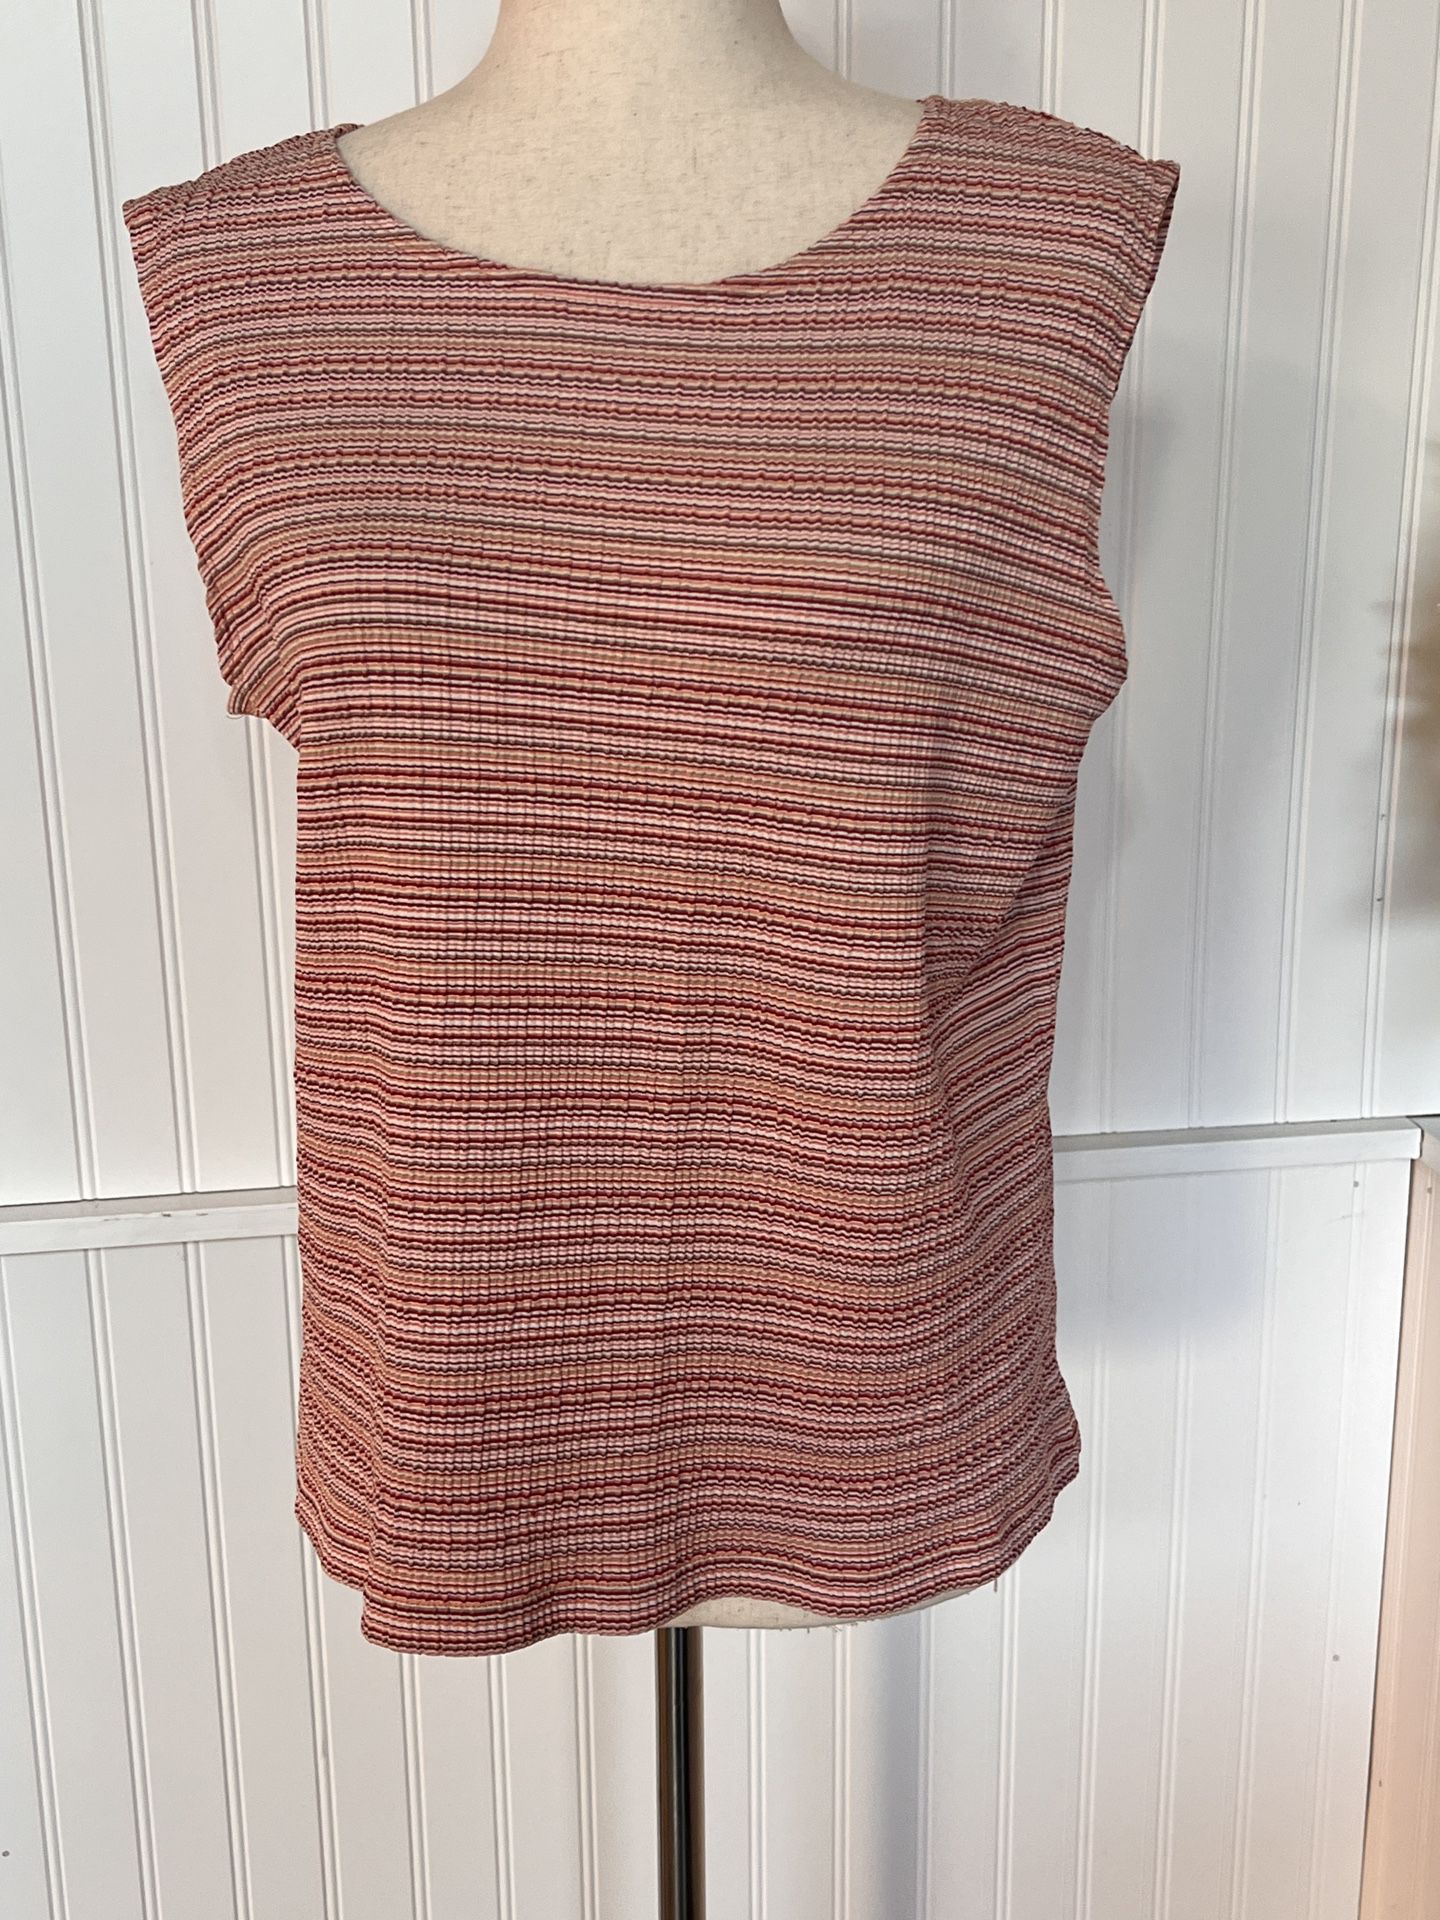 Pale Pink Multicolored Striped Sleeveless Top 